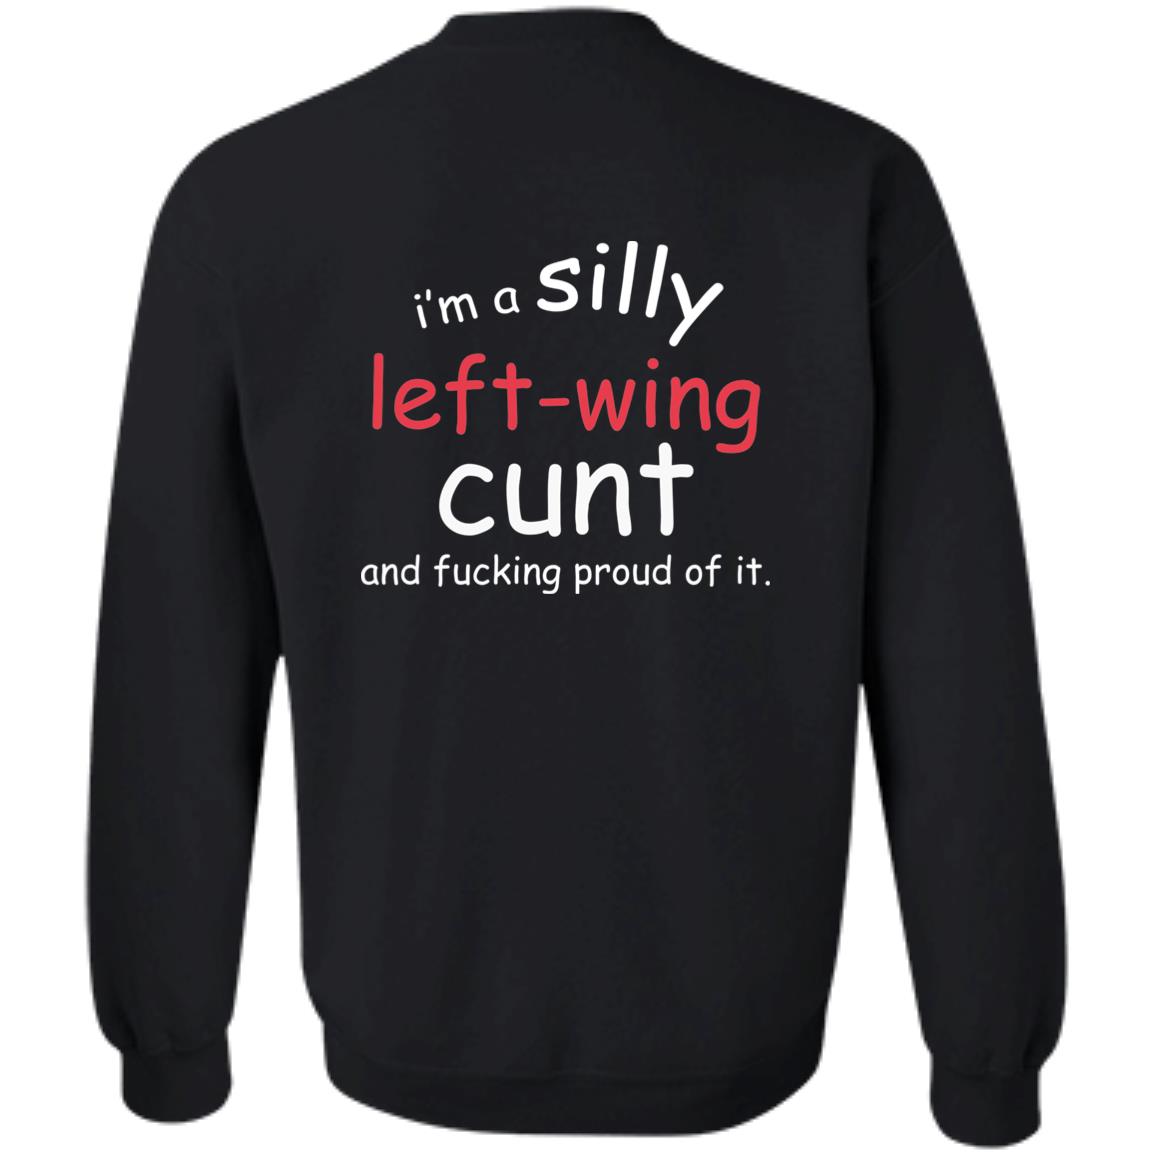 I'm a silly left wing cunt and f*cking proud of it shirt - Endastore.com